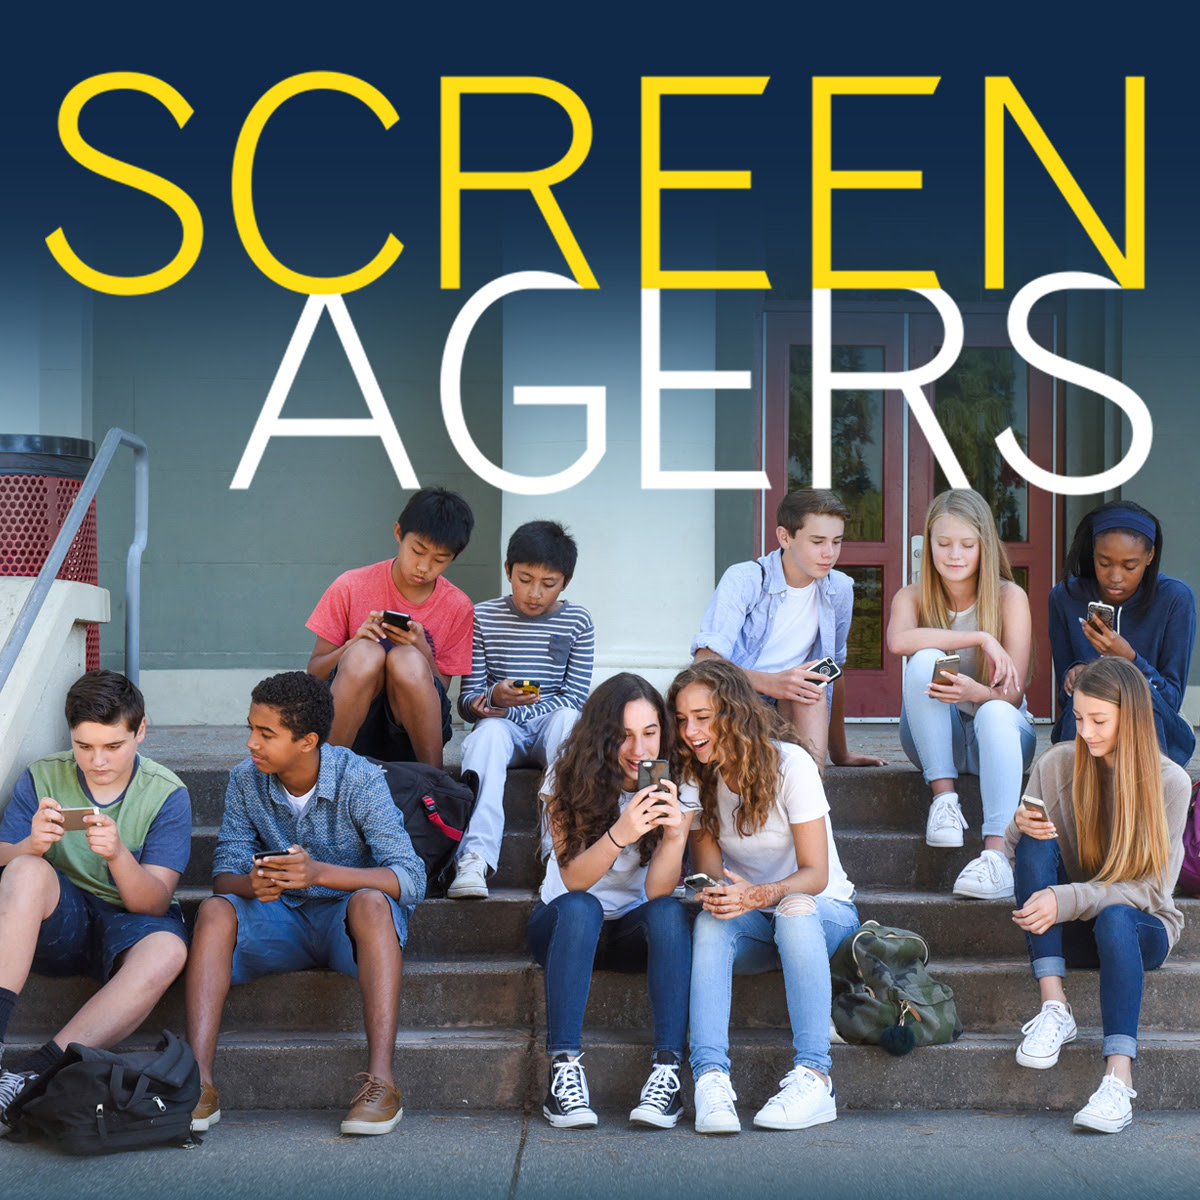 Screenagers Film Presented By Lakewood Council of PTAs